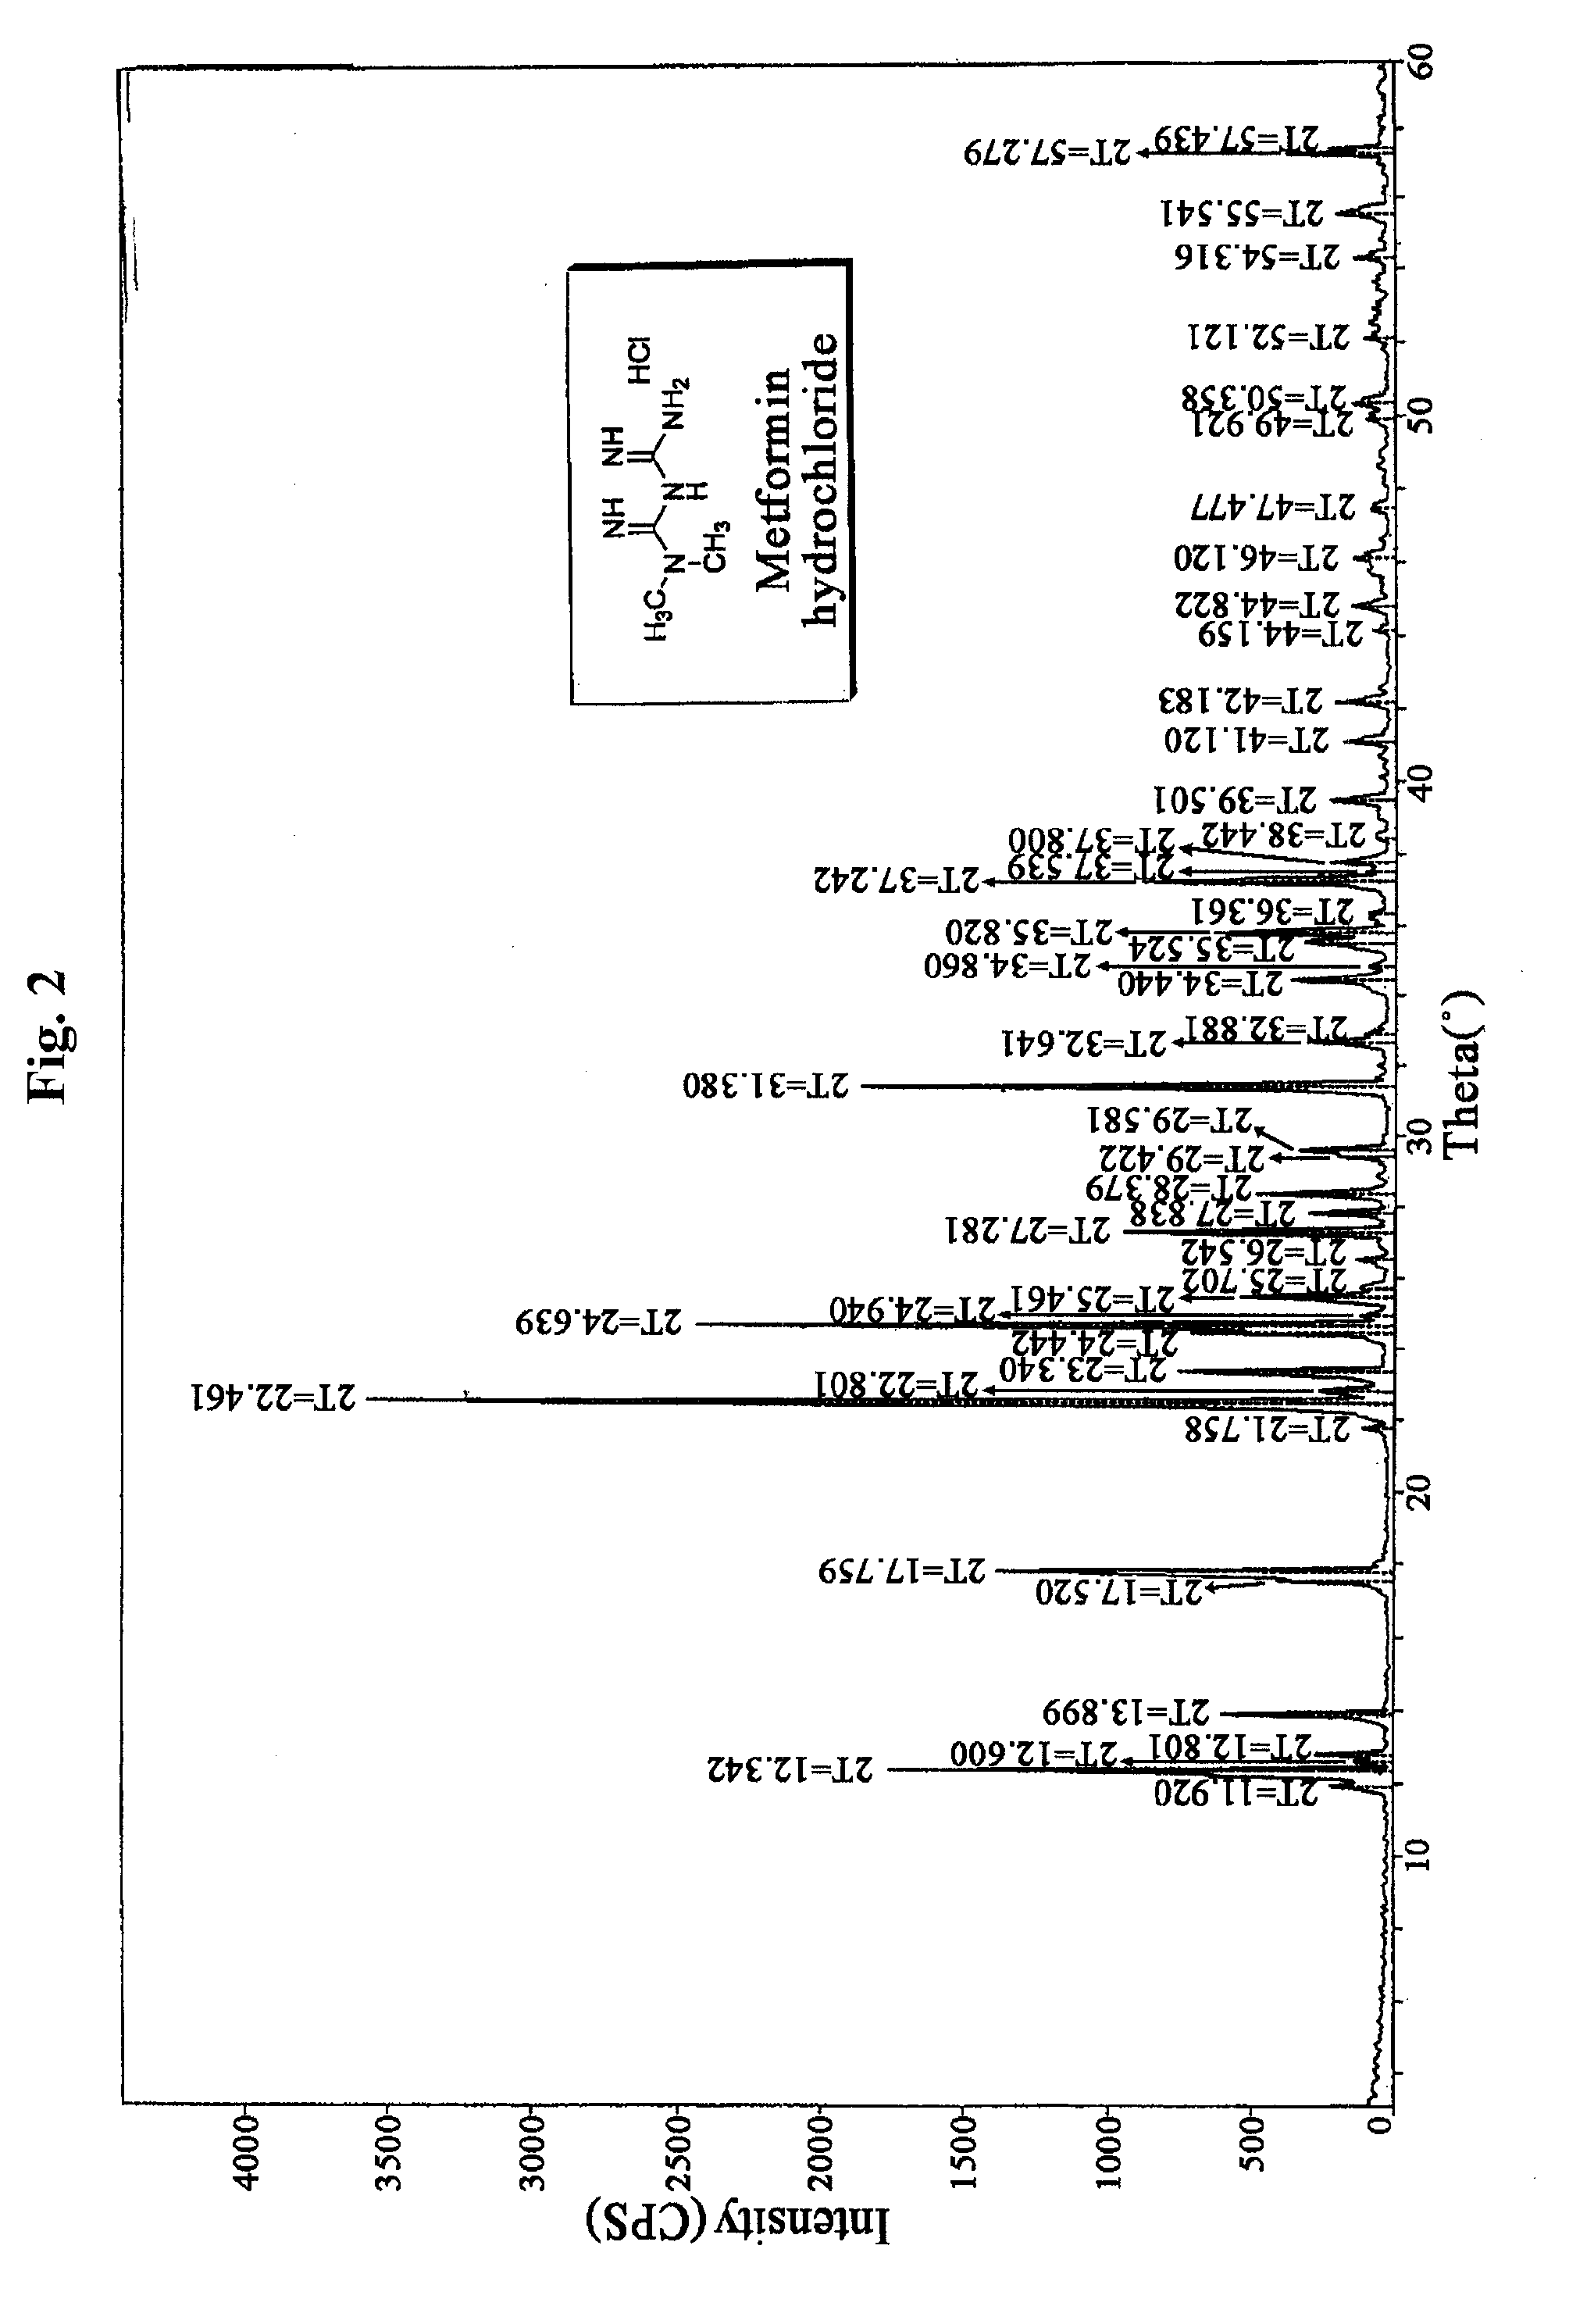 N, n -dimethyl imidodicarbonimidic diamide acetate, method for producing the same and pharmaceutical compositions comprising the same